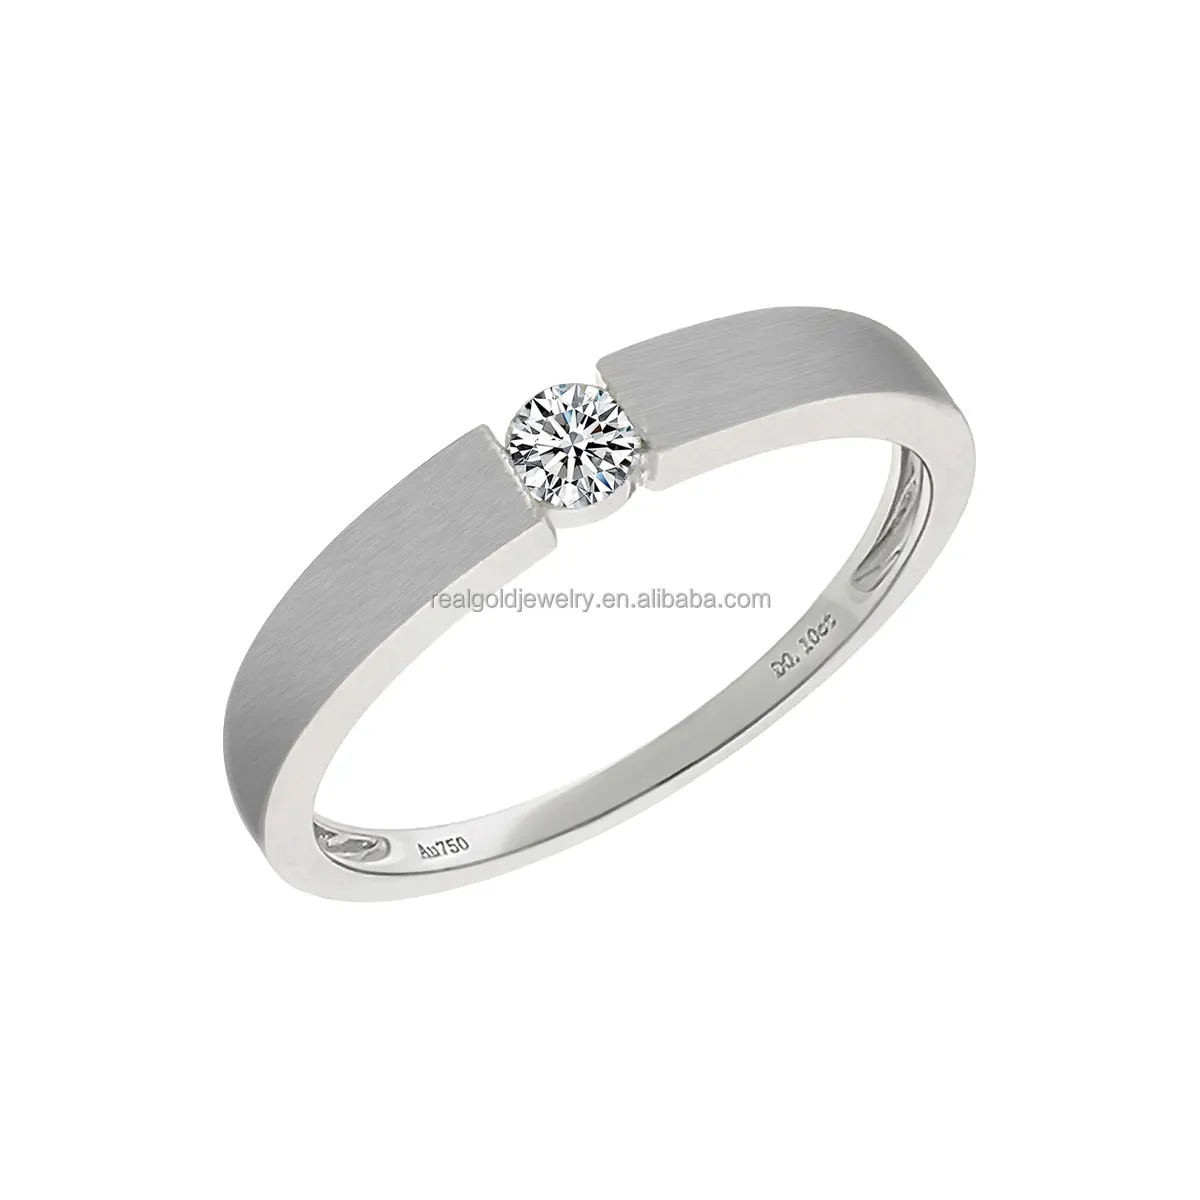 Wedding Band Ring Genuine 14K 18K White Gold Ring Single Solitaire Real Gold Diamond Ring Fine Jewelry